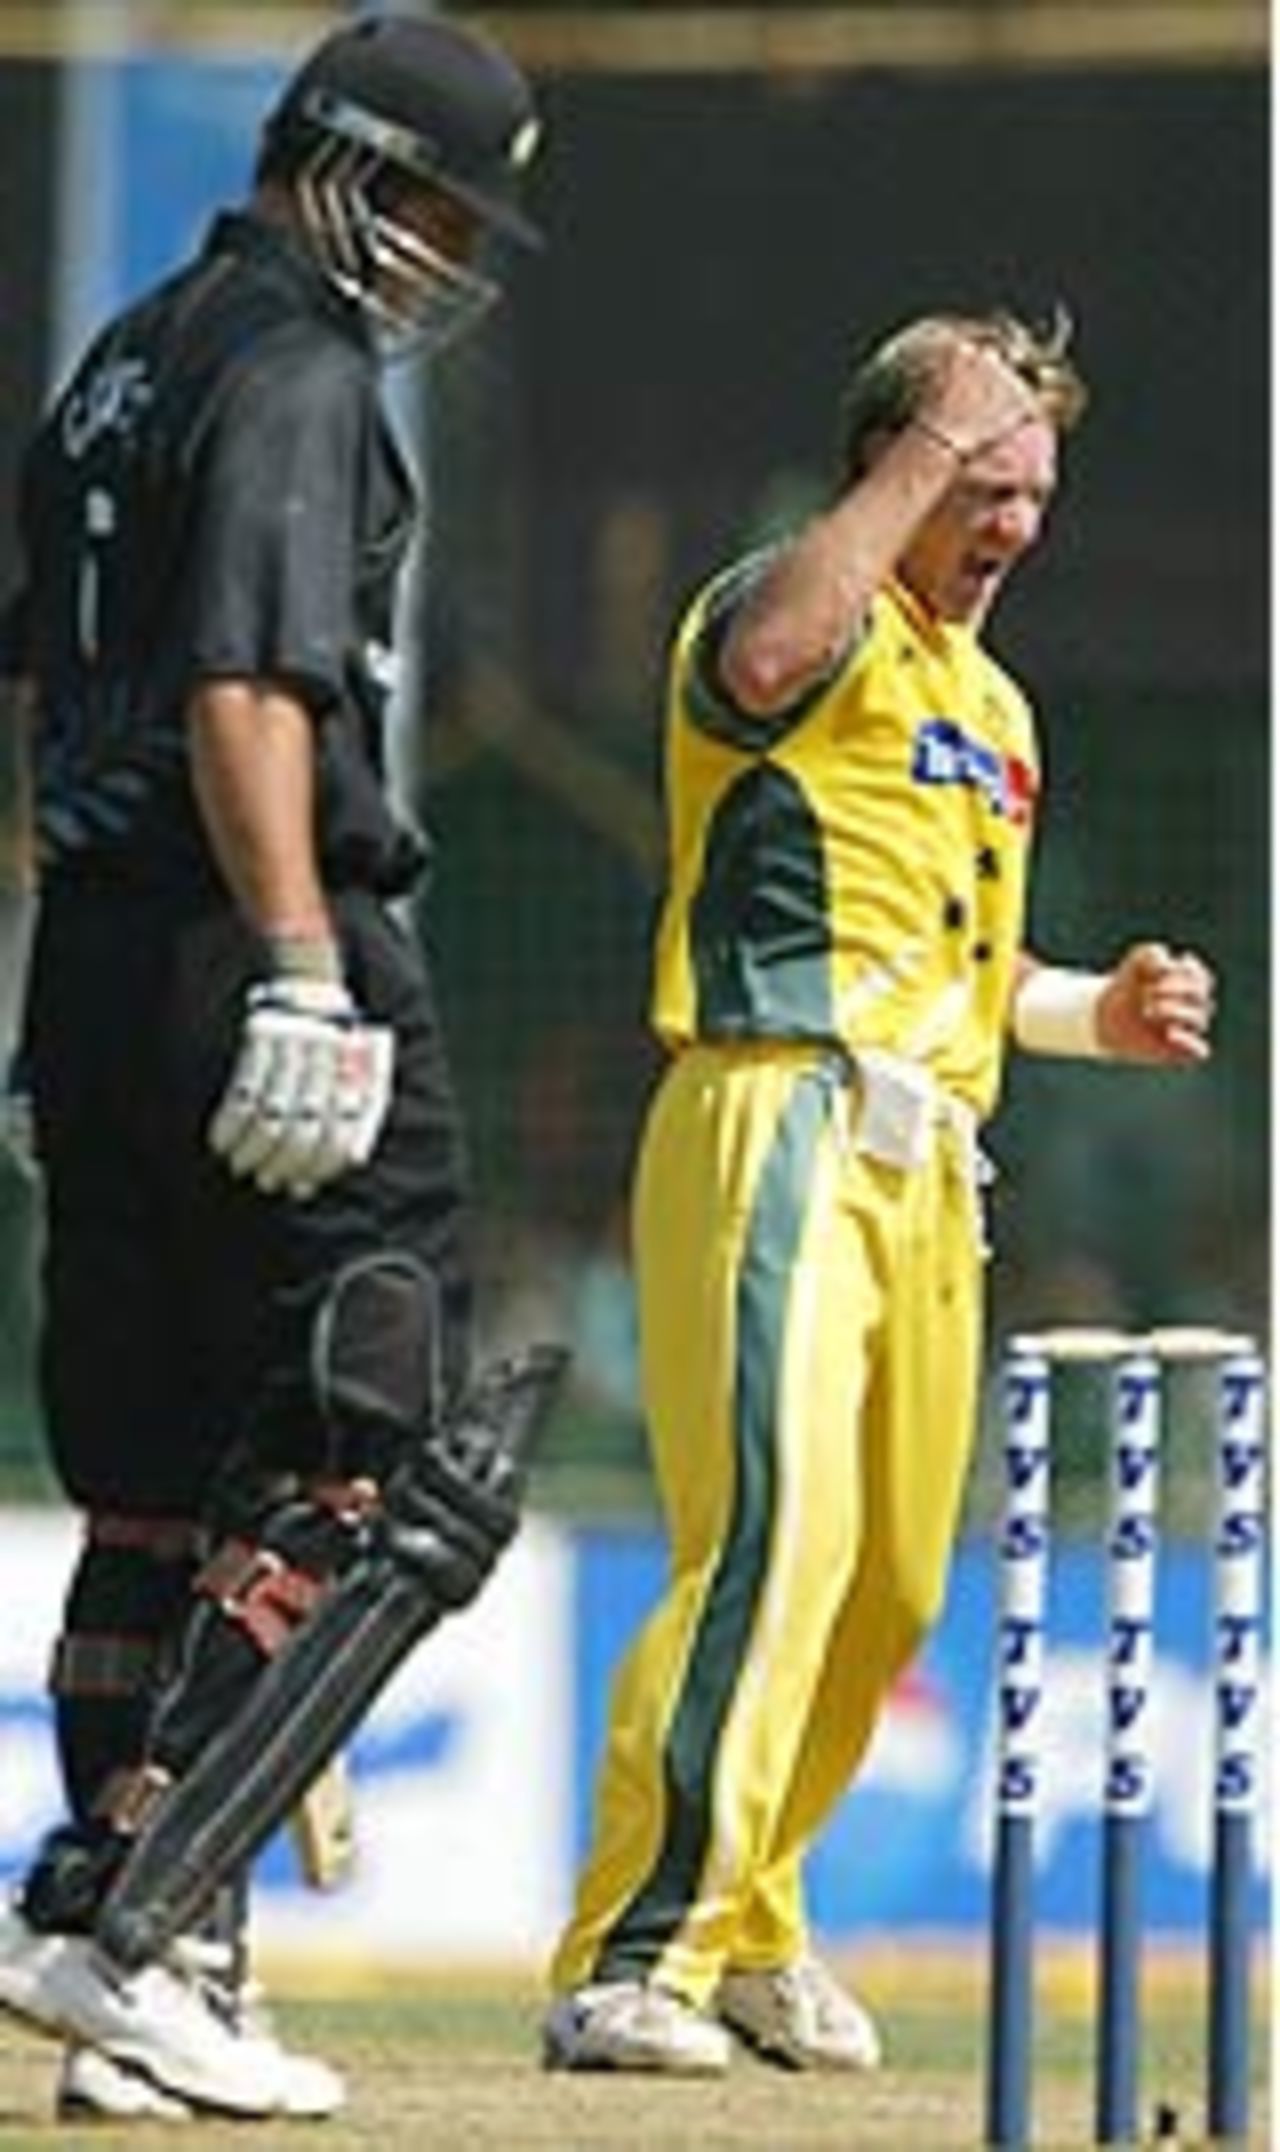 Andy Bichel exults after getting the wicket of Chris Cairns, Australia v New Zealand, 5th ODI, TVS Cup, Pune, November 3rd, 2003